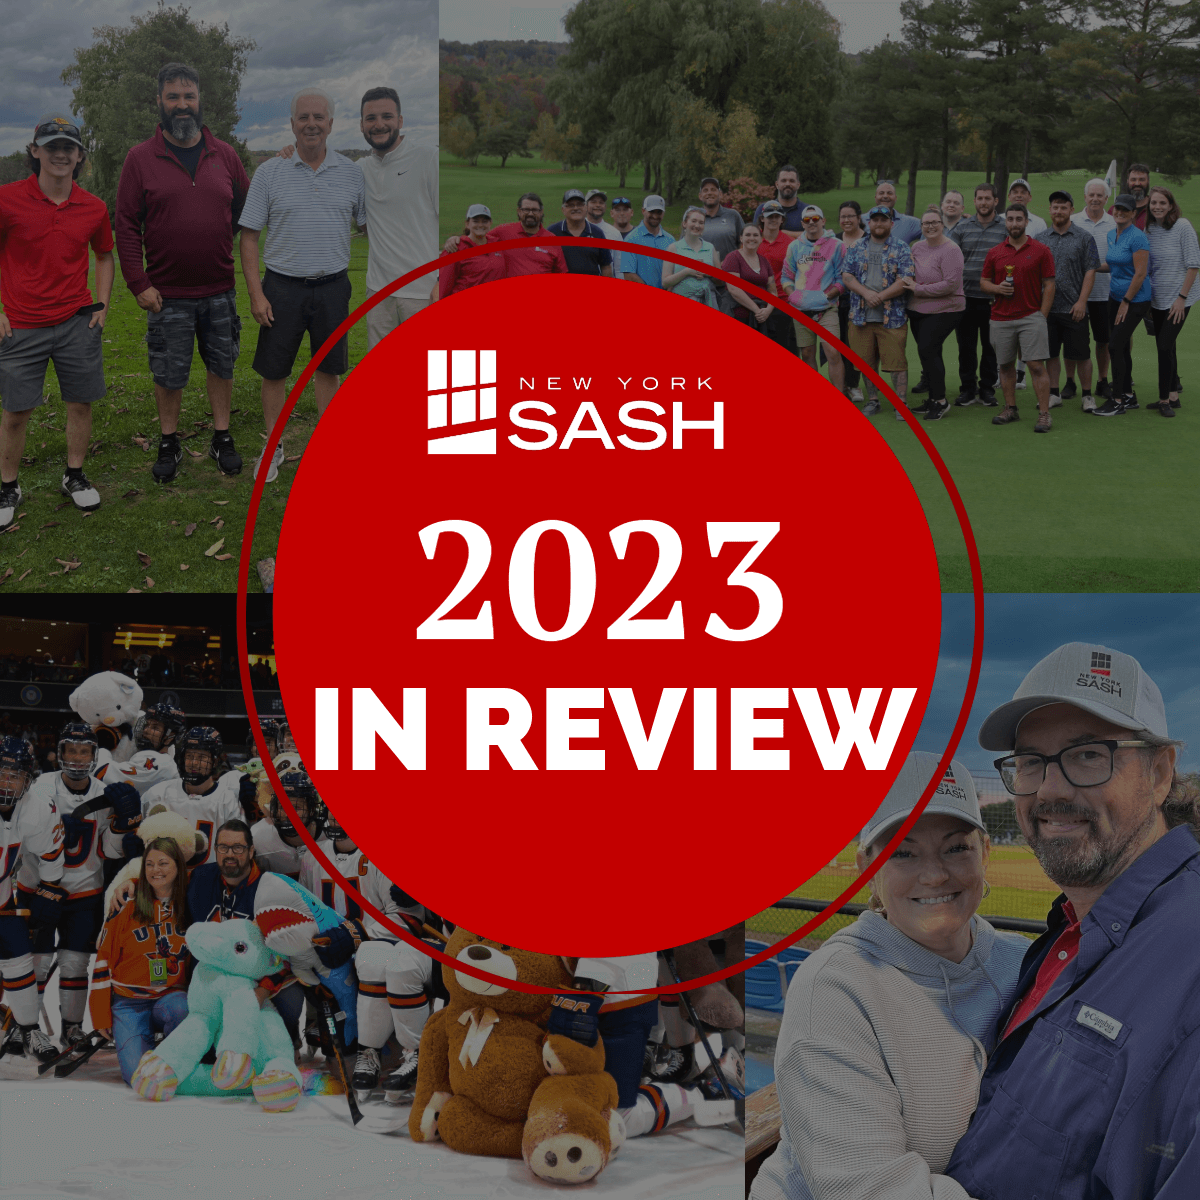 New York Sash year in review